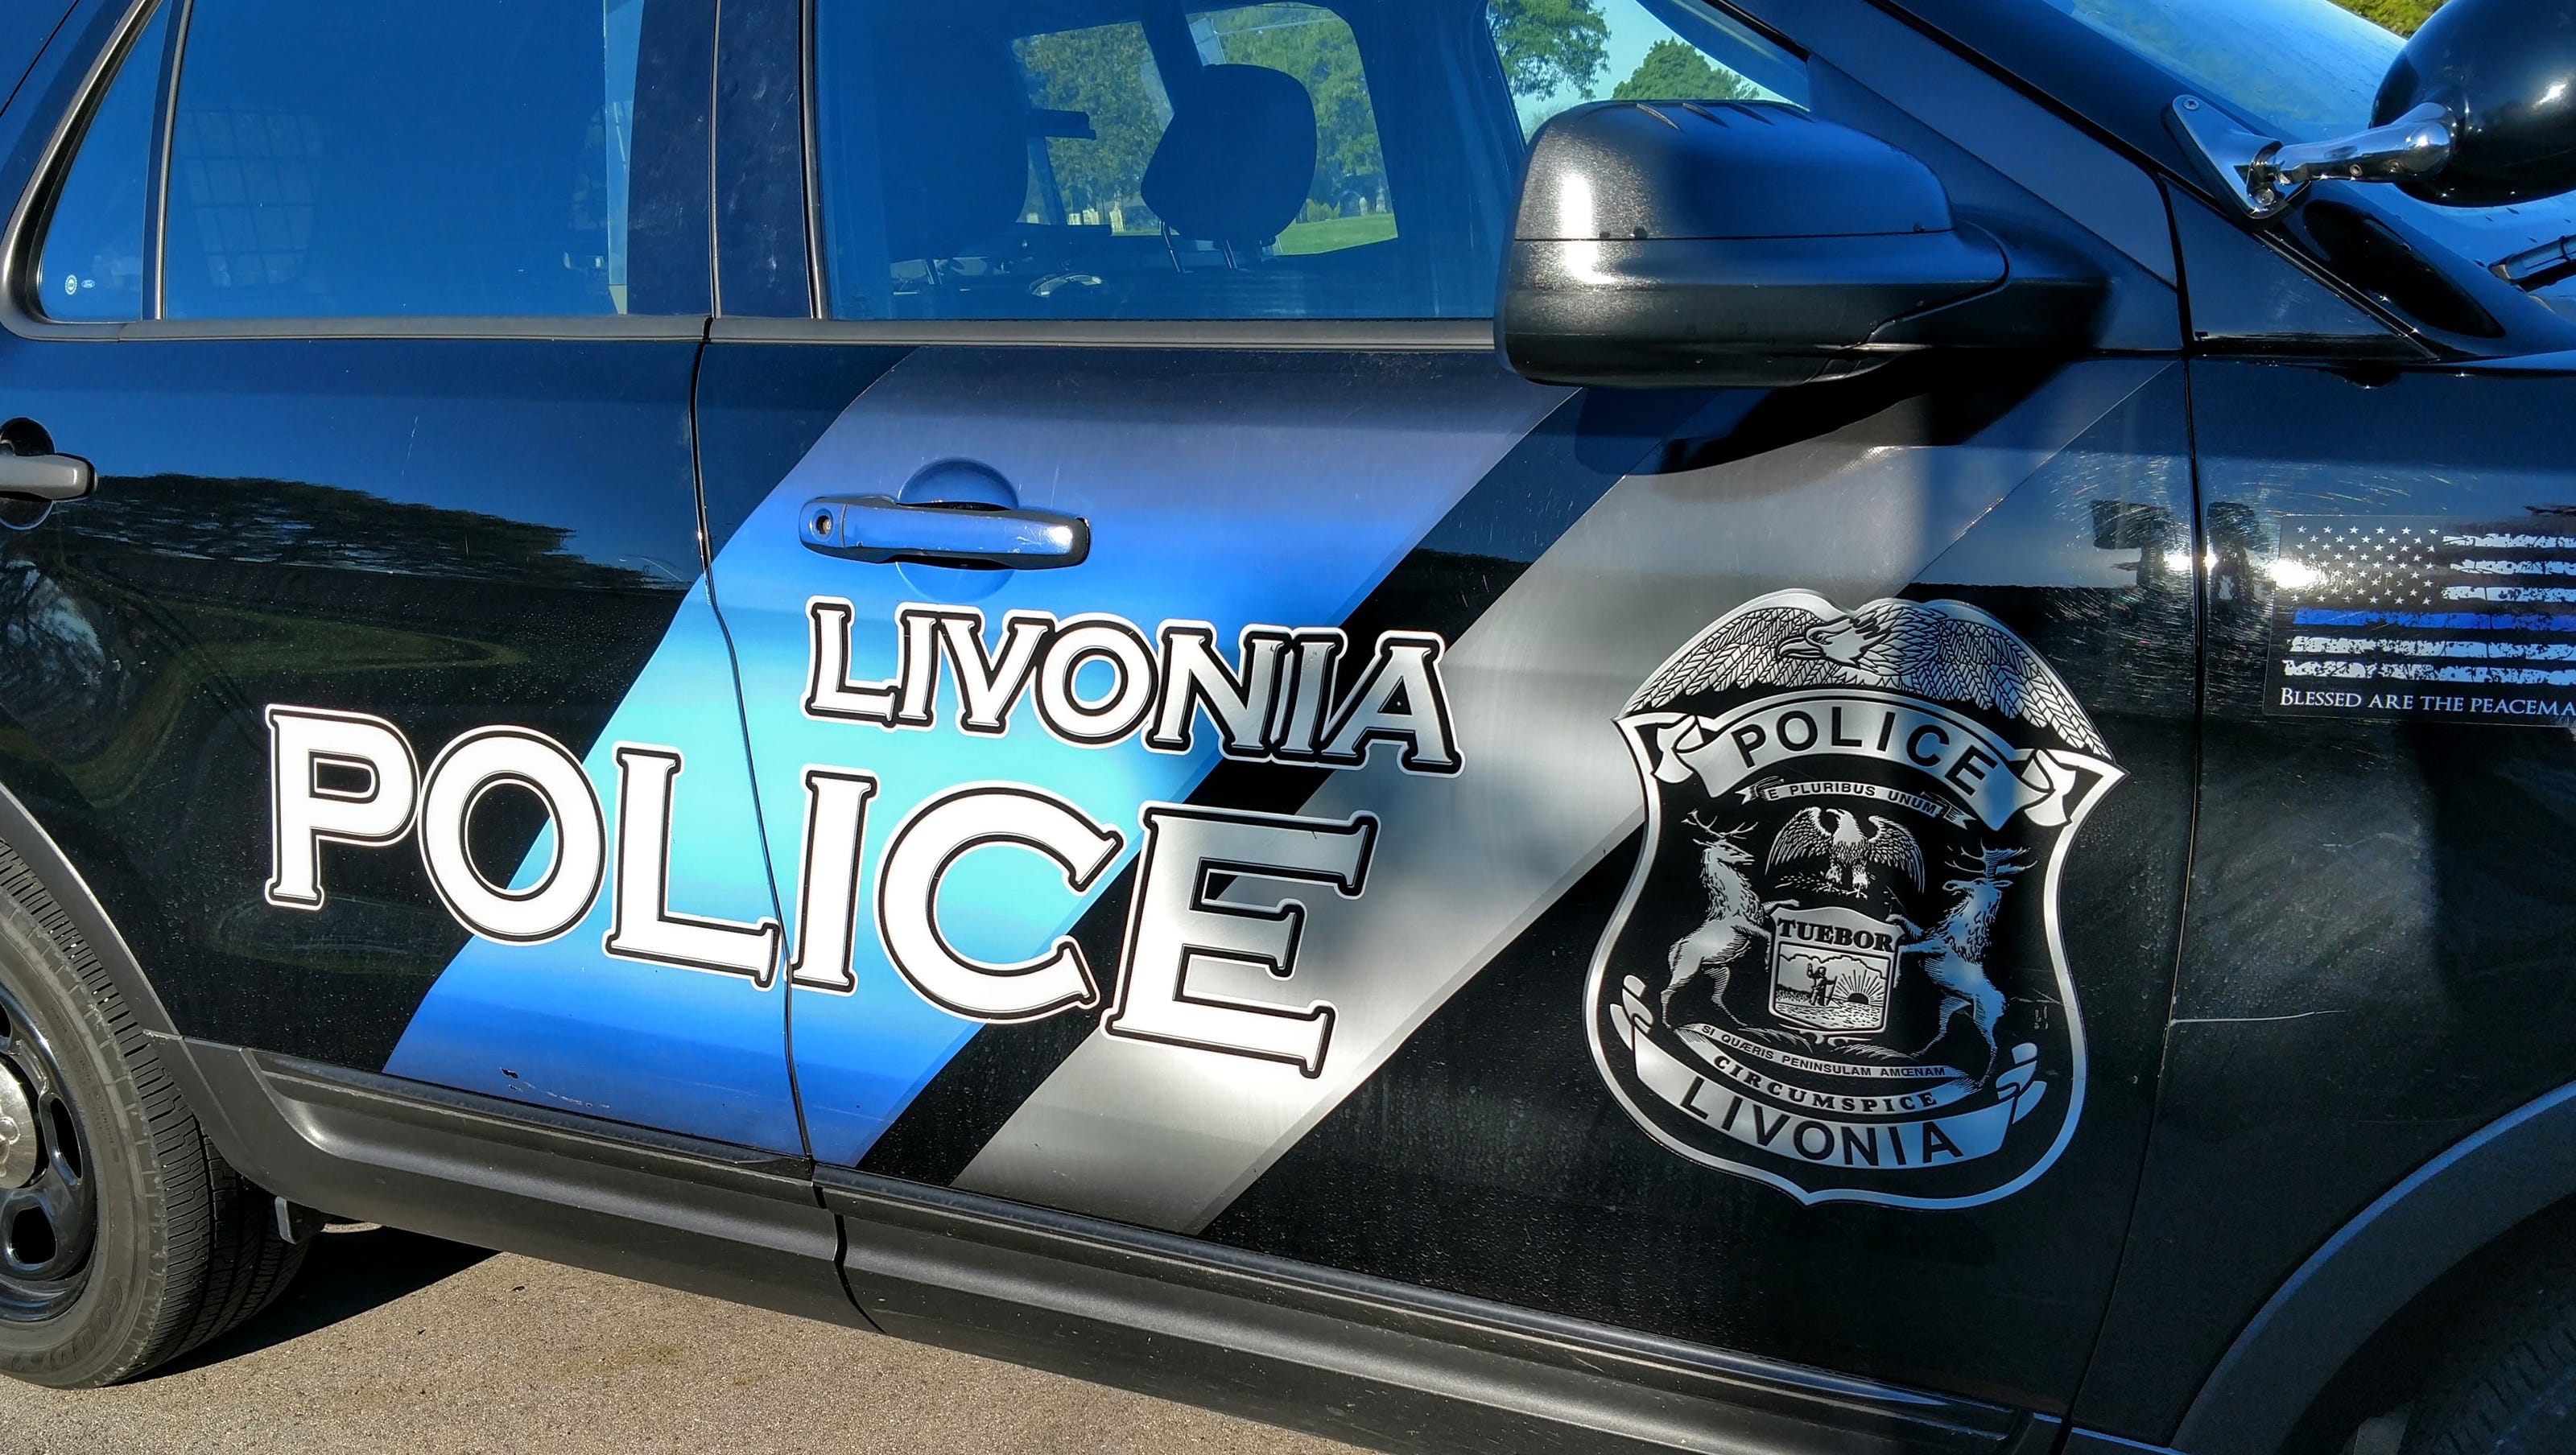 Livonia police revive man who snorted heroin using Narcan